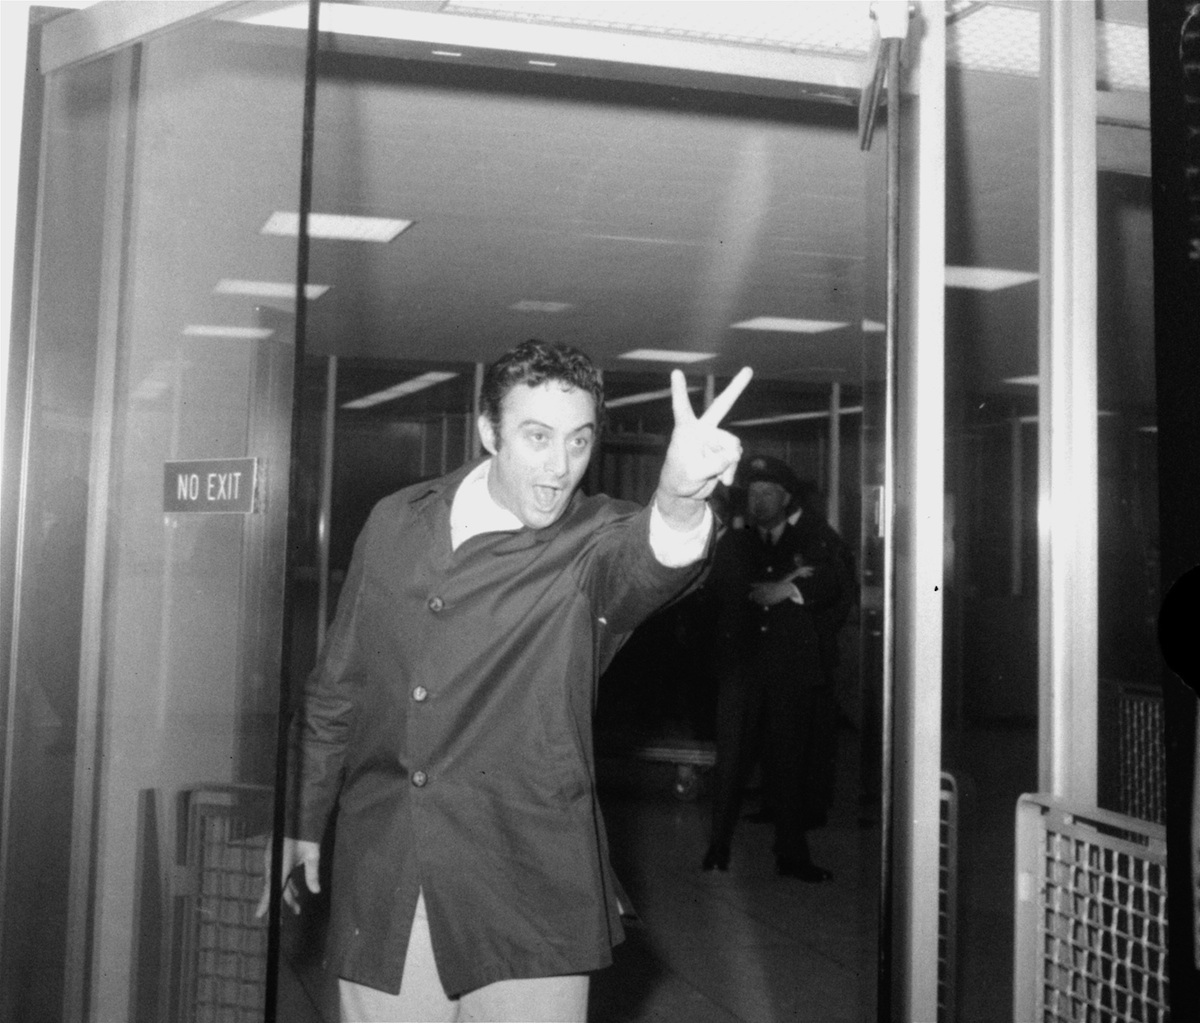 Lenny Bruce, refused entry to Britain earlier in the day  "in the public interest," makes a V-sign as he leaves U.S. customs office after returning to New York's Idlewild Airport on Apr. 8, 1963. (John Lindsay—AP Photo)